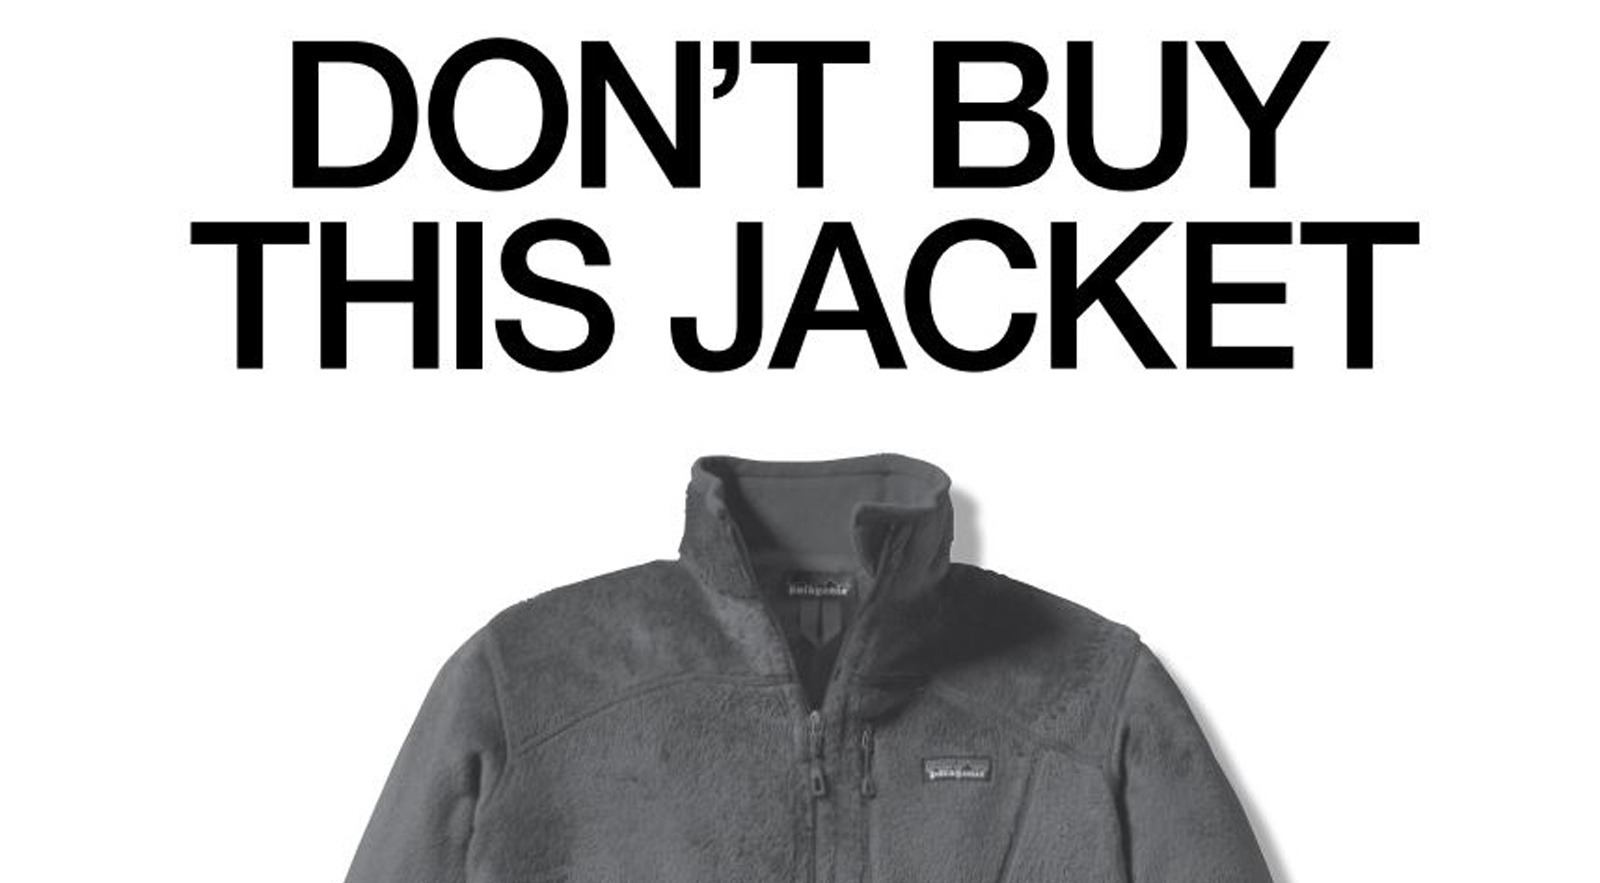 Patagonia ad with the words "Don't buy this jacket"
